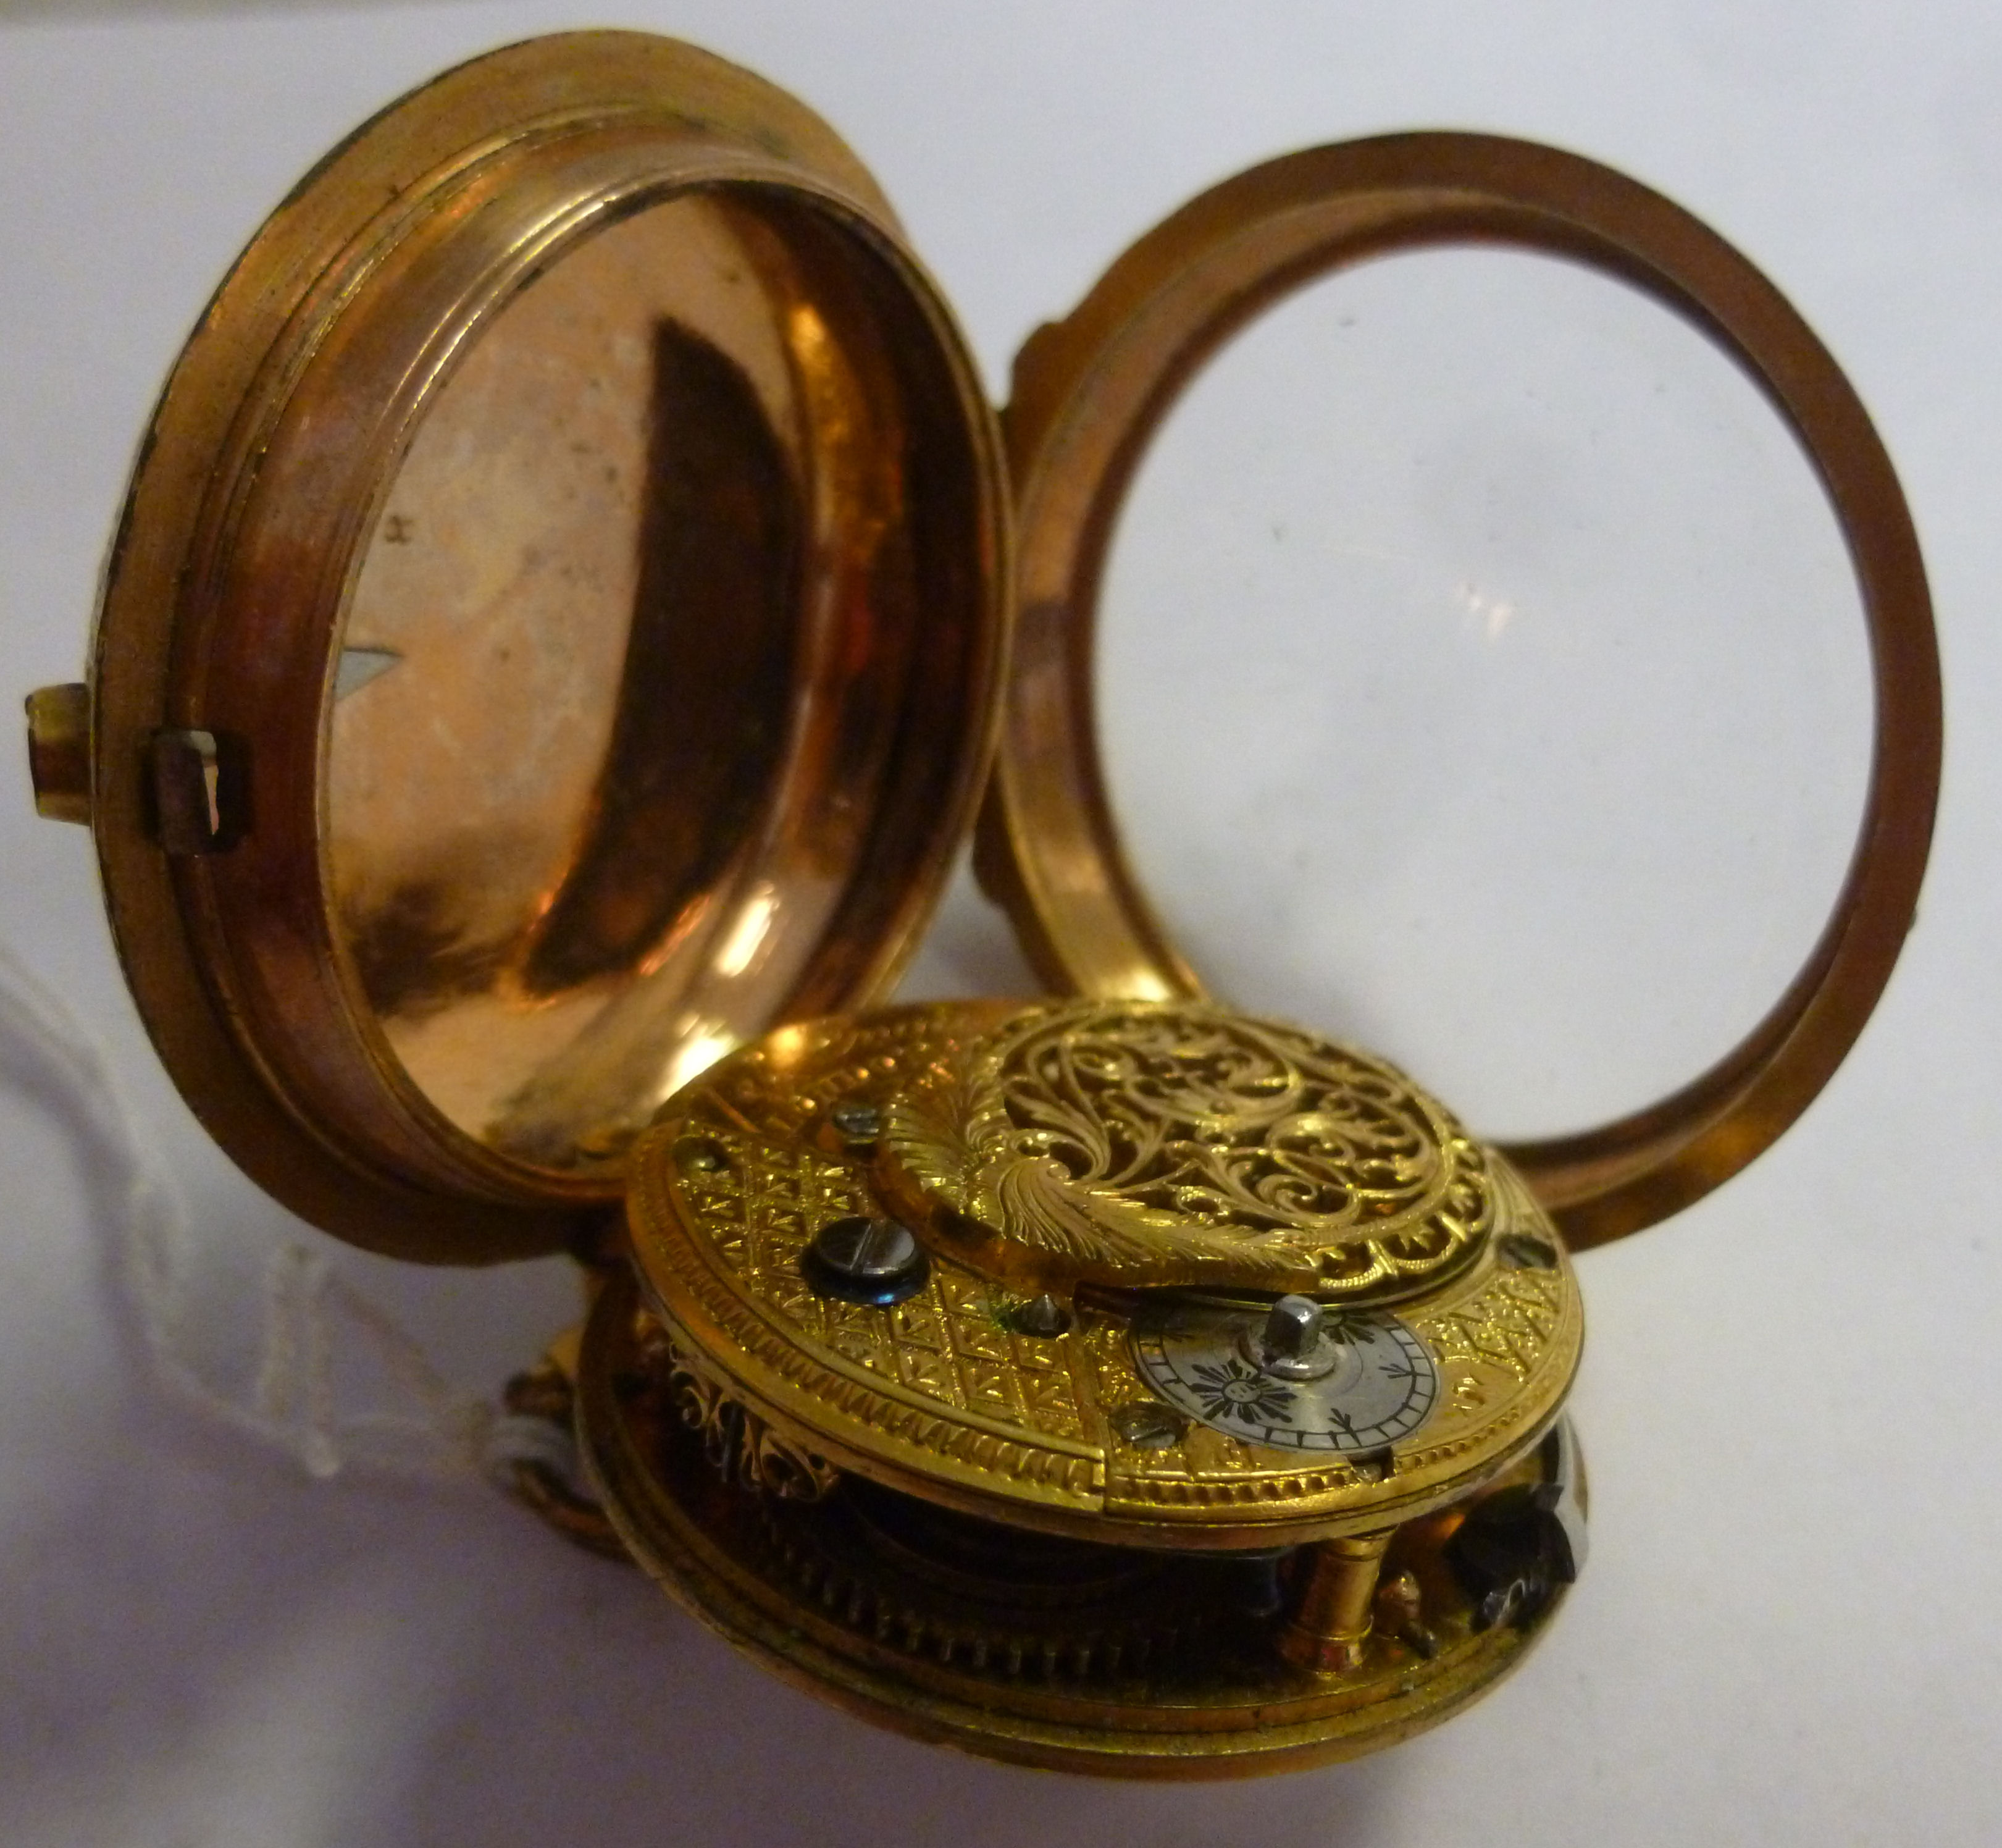 An early 19thC engraved and chased gilt metal cased pocket watch, the fusee movement inscribed Ja. - Image 3 of 7